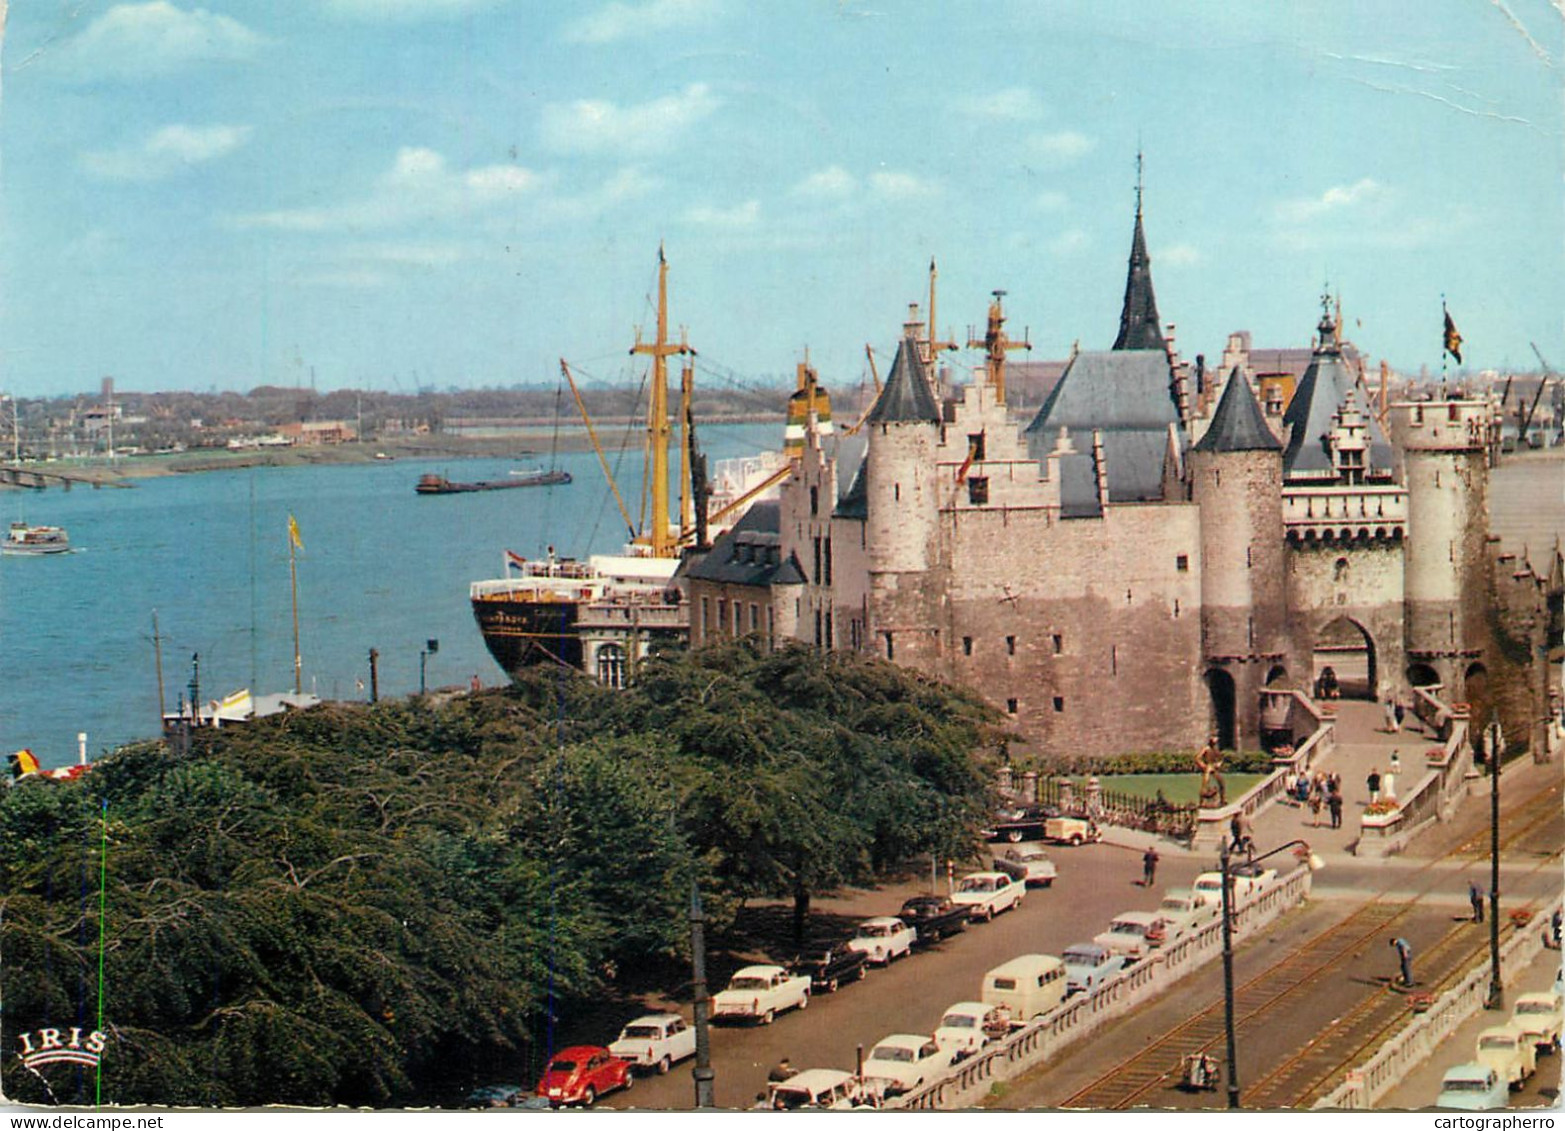 Navigation Sailing Vessels & Boats Themed Postcard Antwerpen Galleon And Citadel - Segelboote